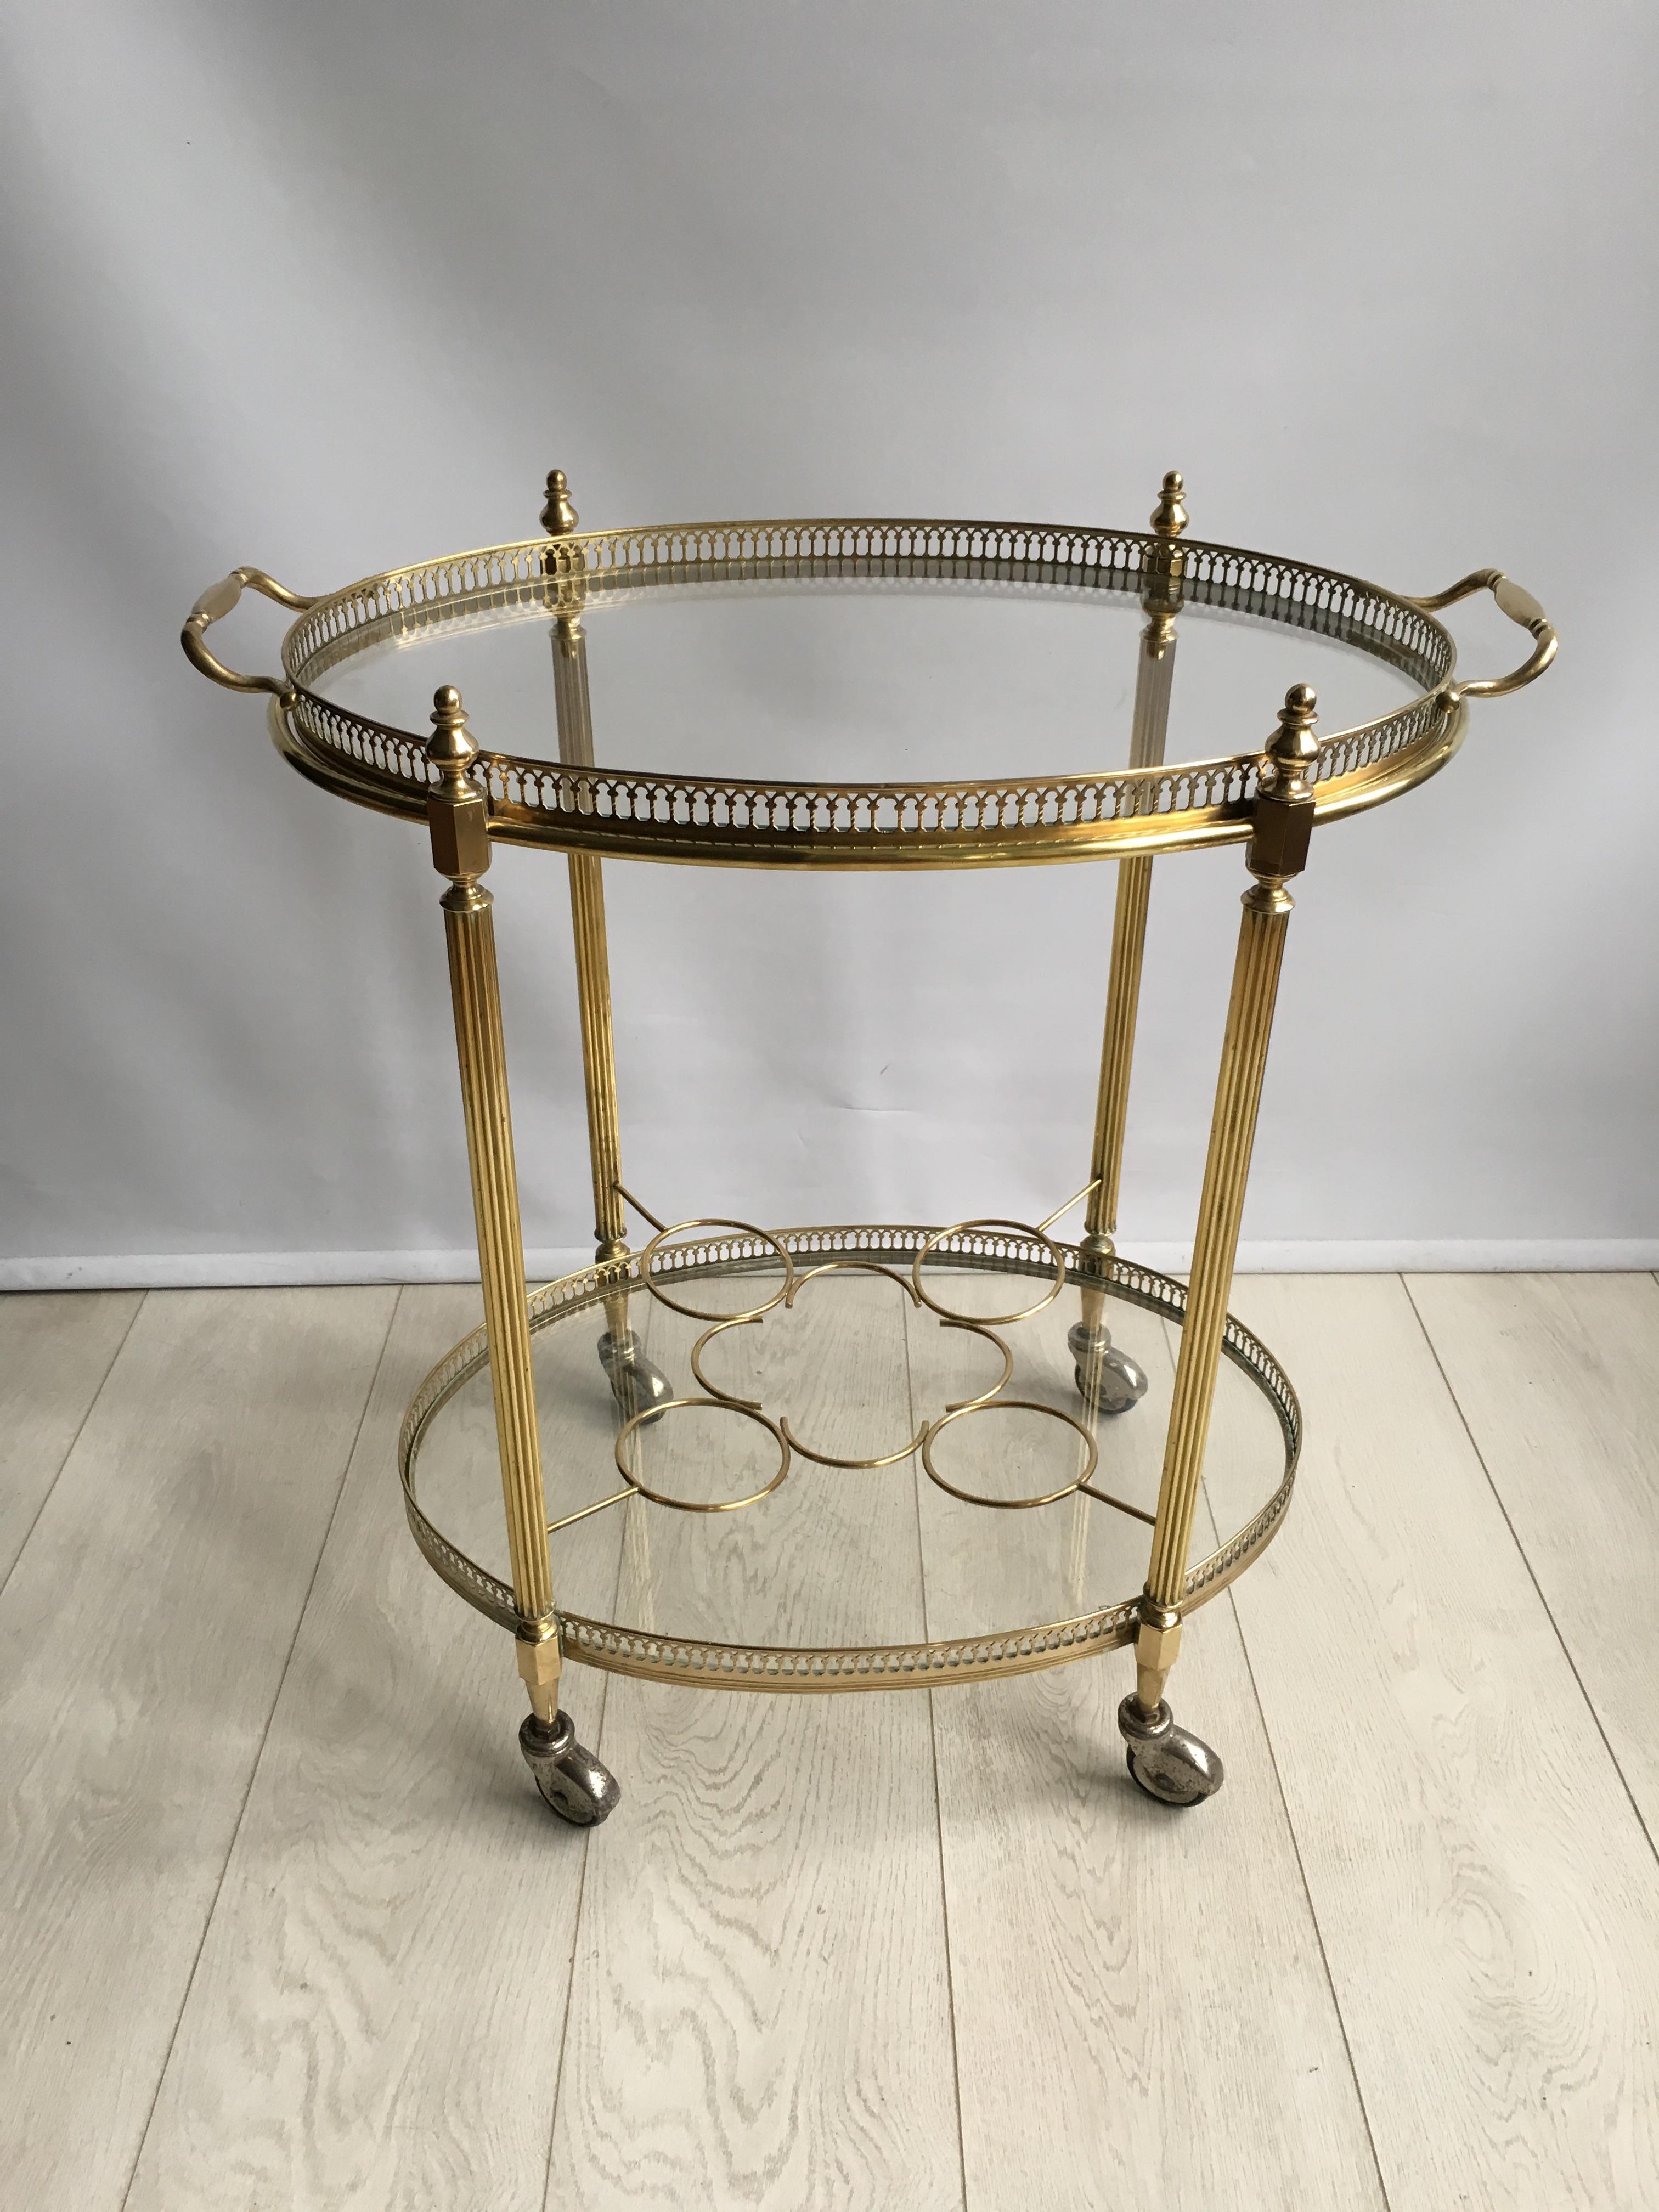 Hollywood Regency Vintage French Brass Oval Drinks Trolley or Bar Cart